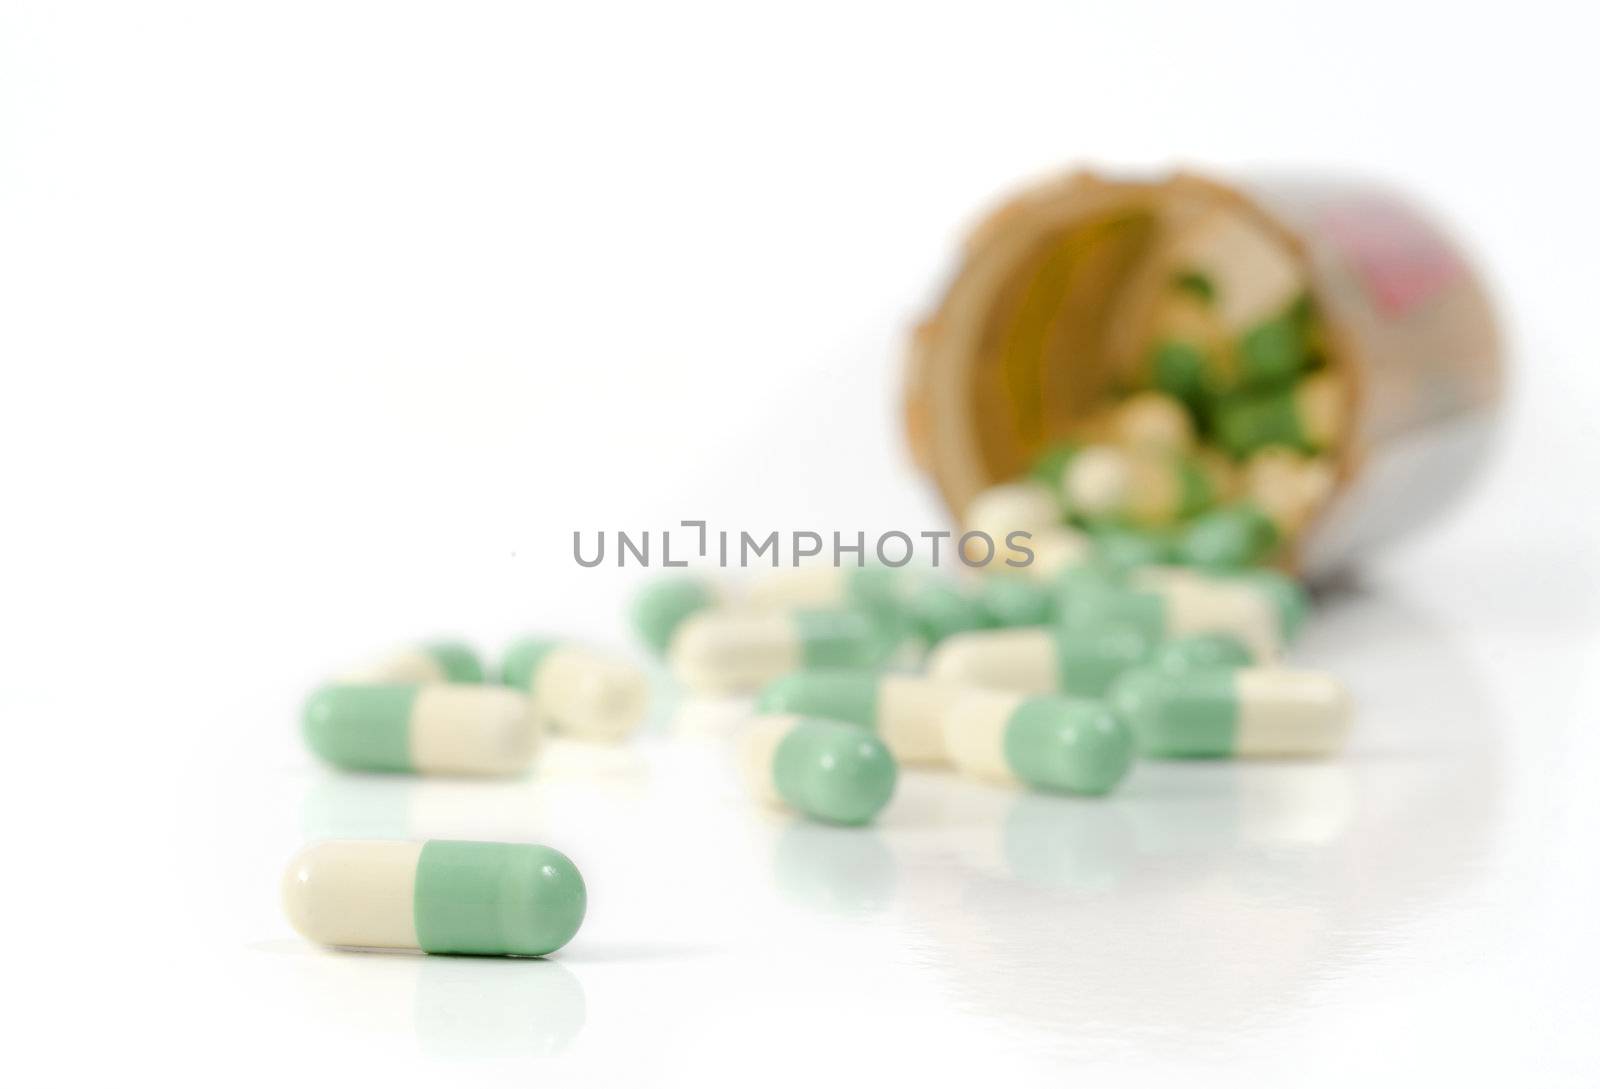 Selective focus on the foreground capsules spilled out of the pill bottle onto the white background